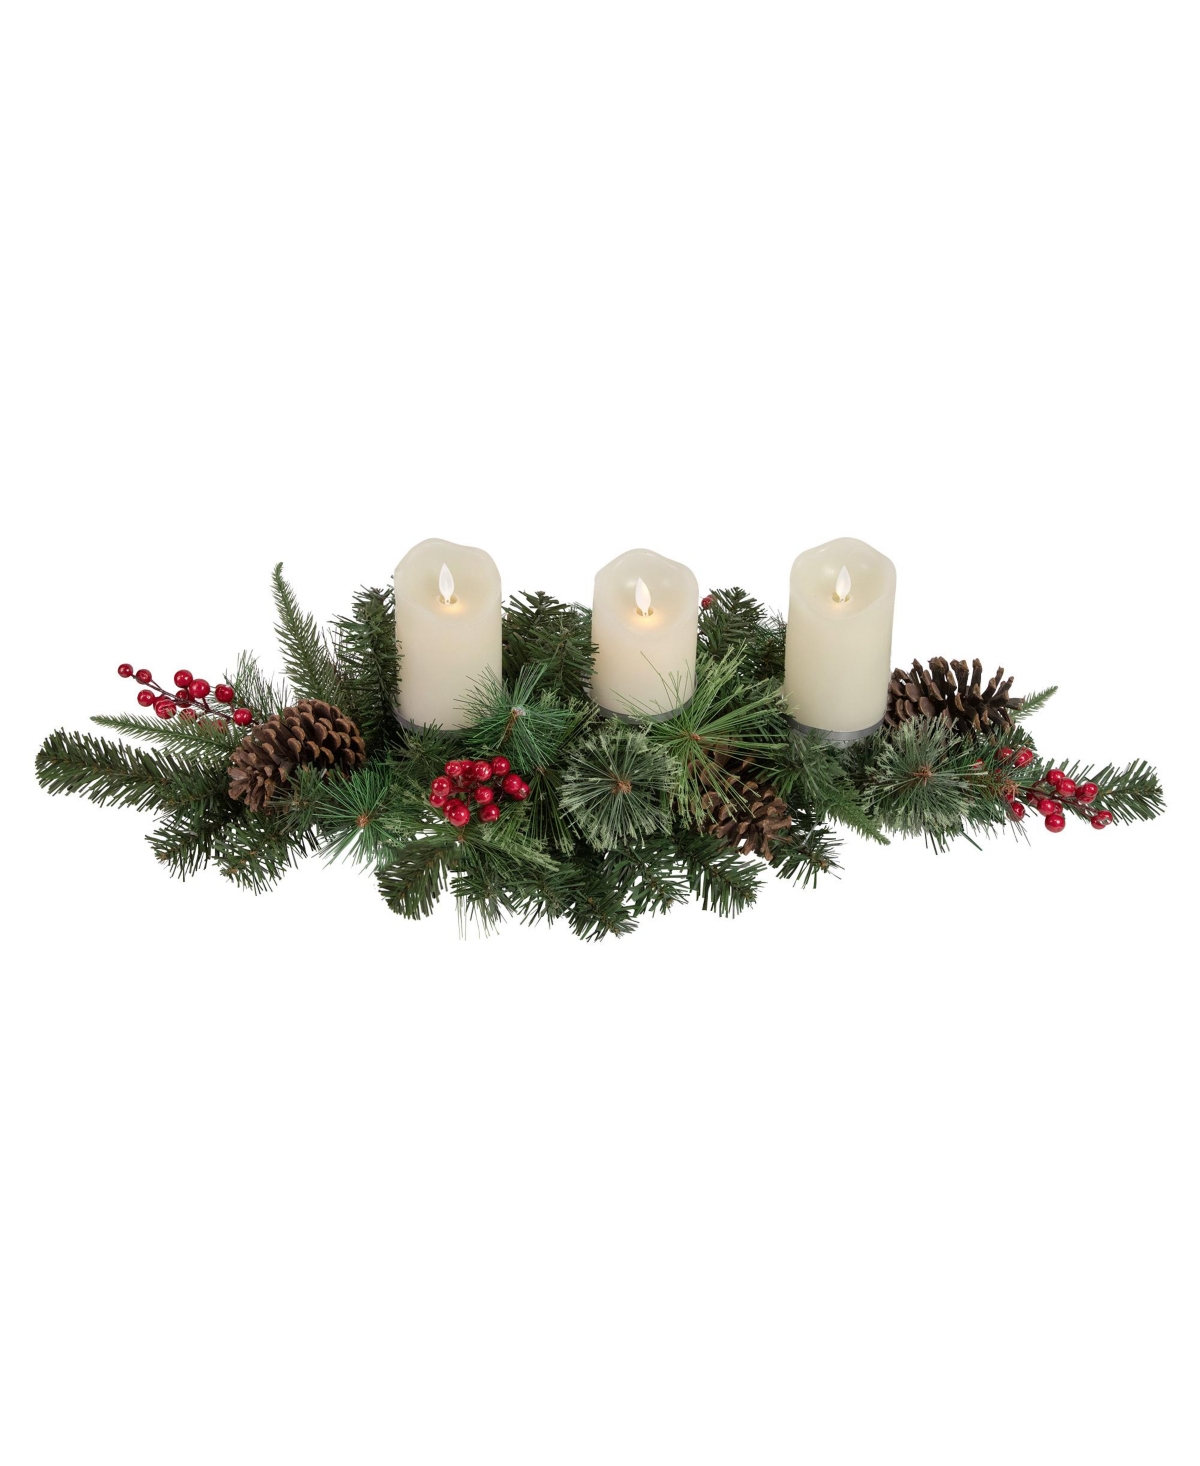 Decorated Artificial Pine Christmas Candle Holder Centerpiece, 32" - Green